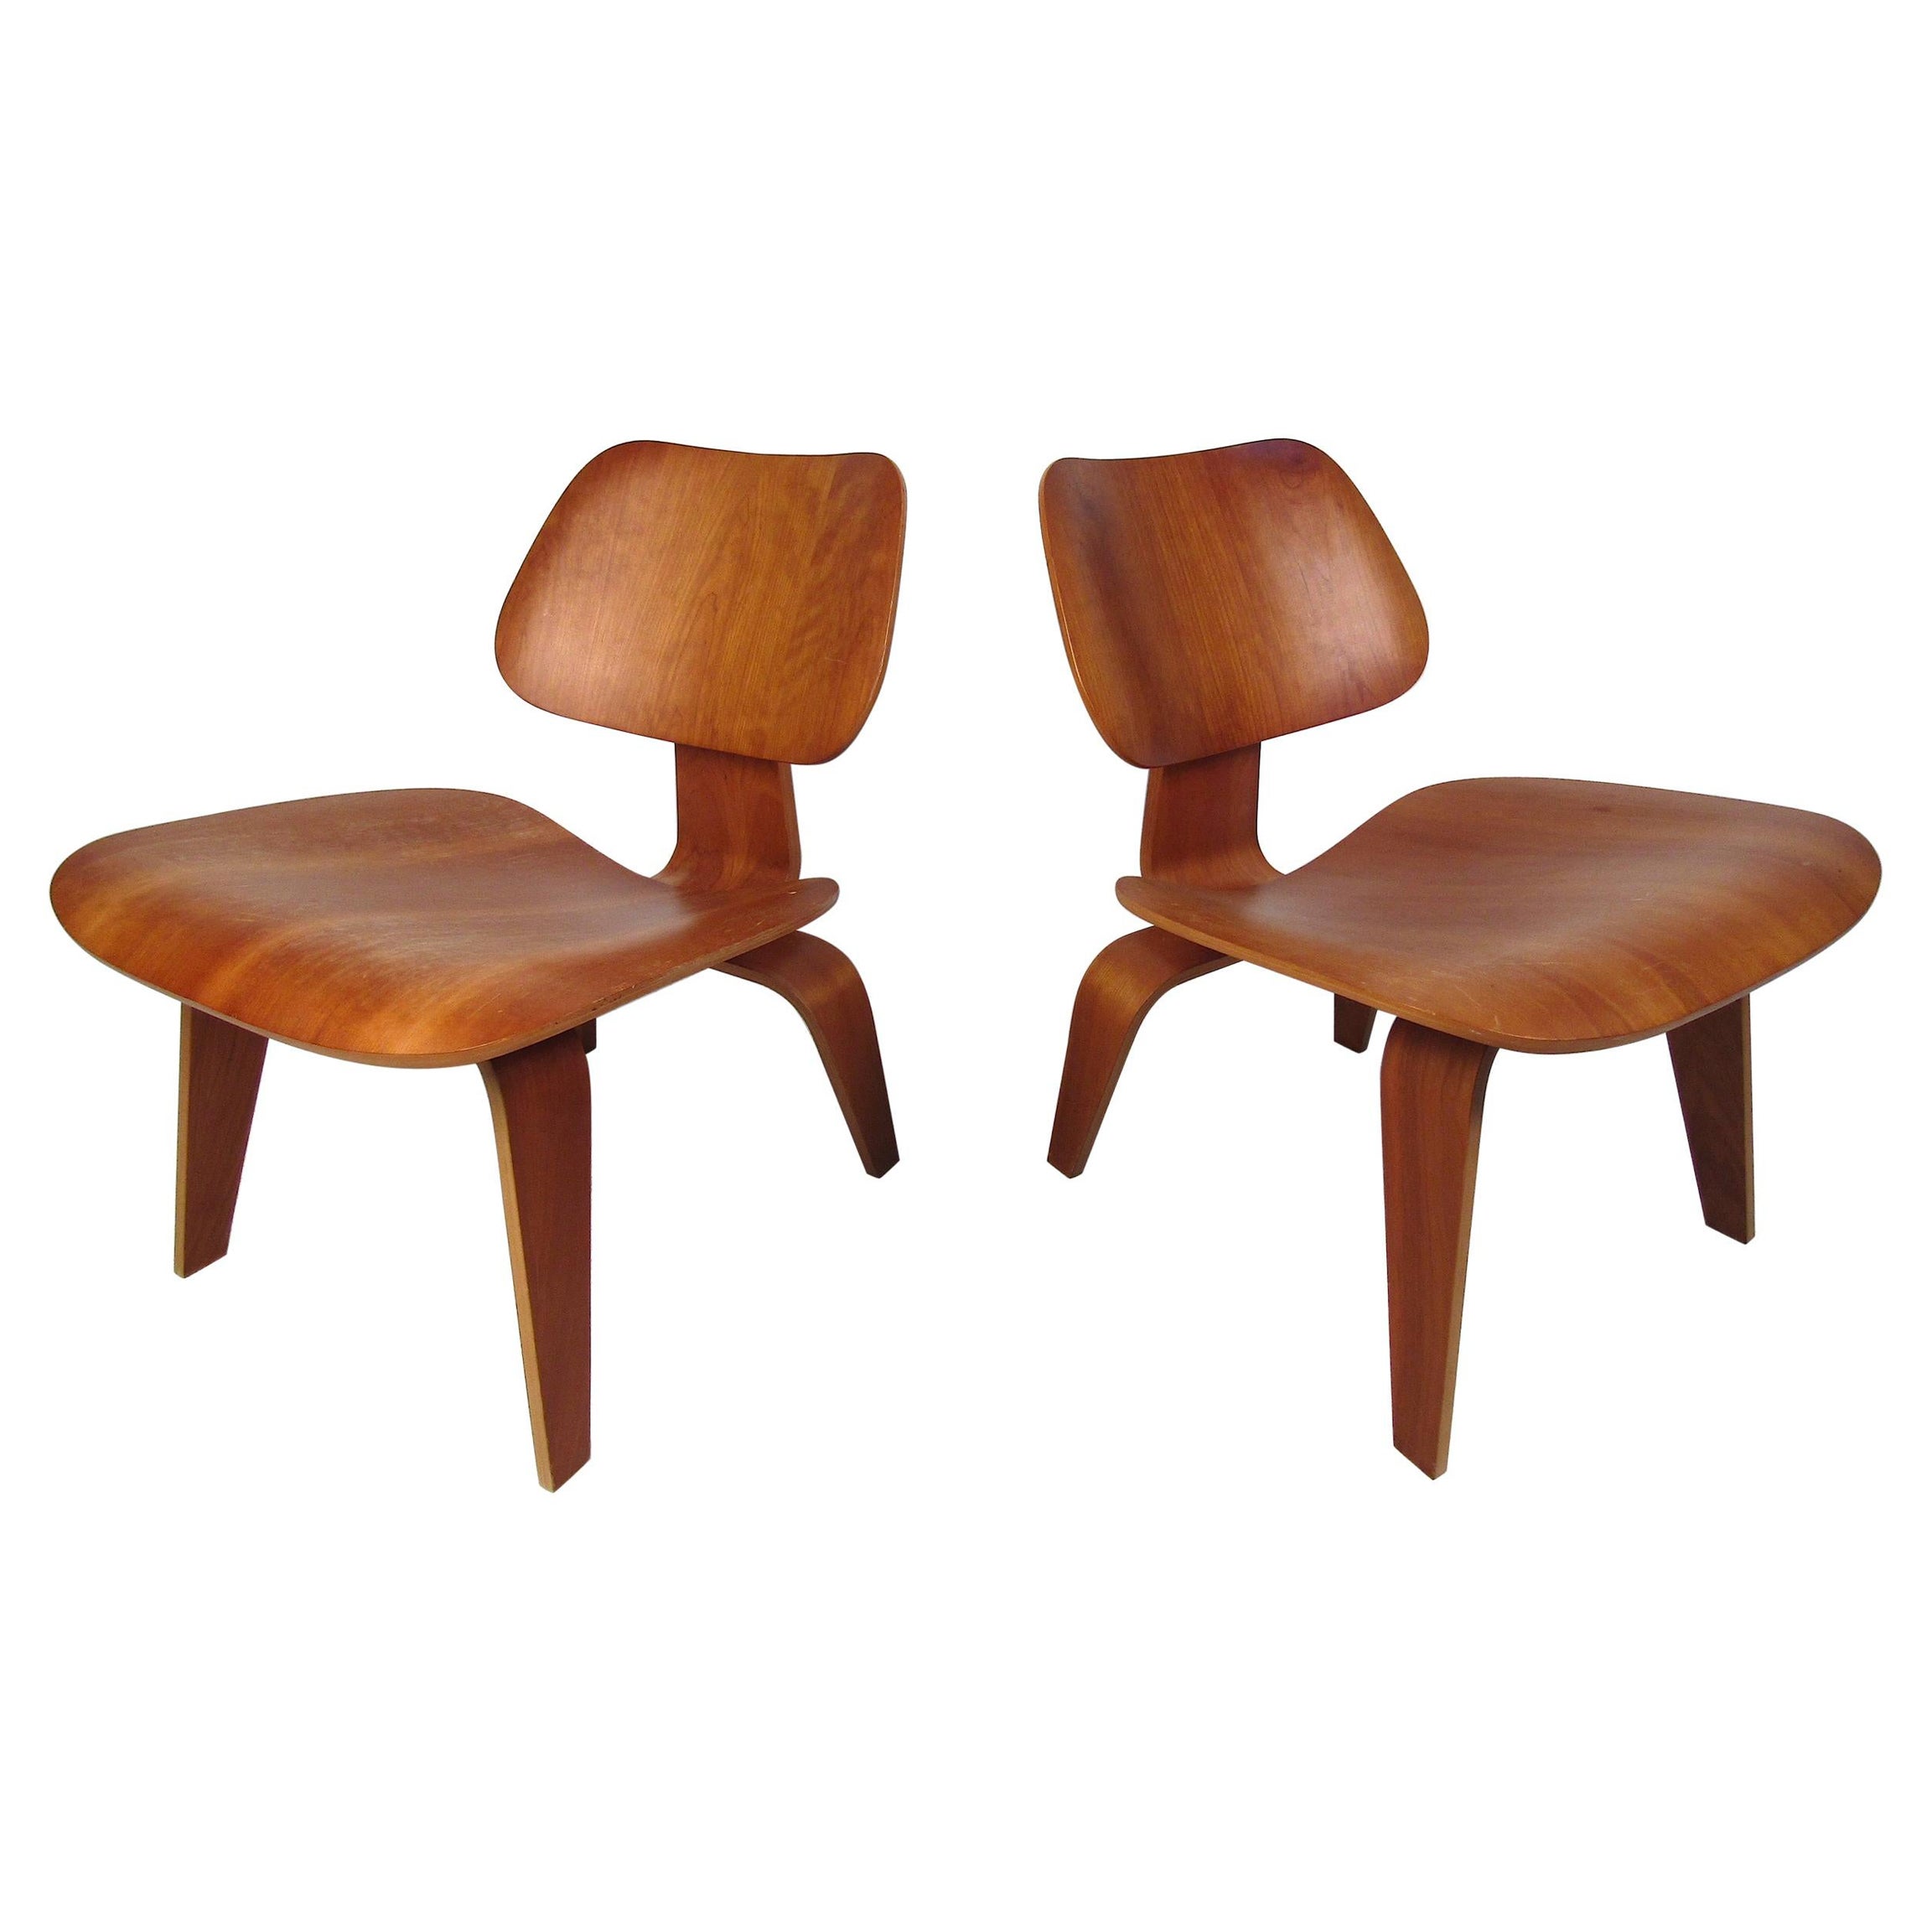 Pair of LCW Bentwood Chairs by Eames for Herman Miller